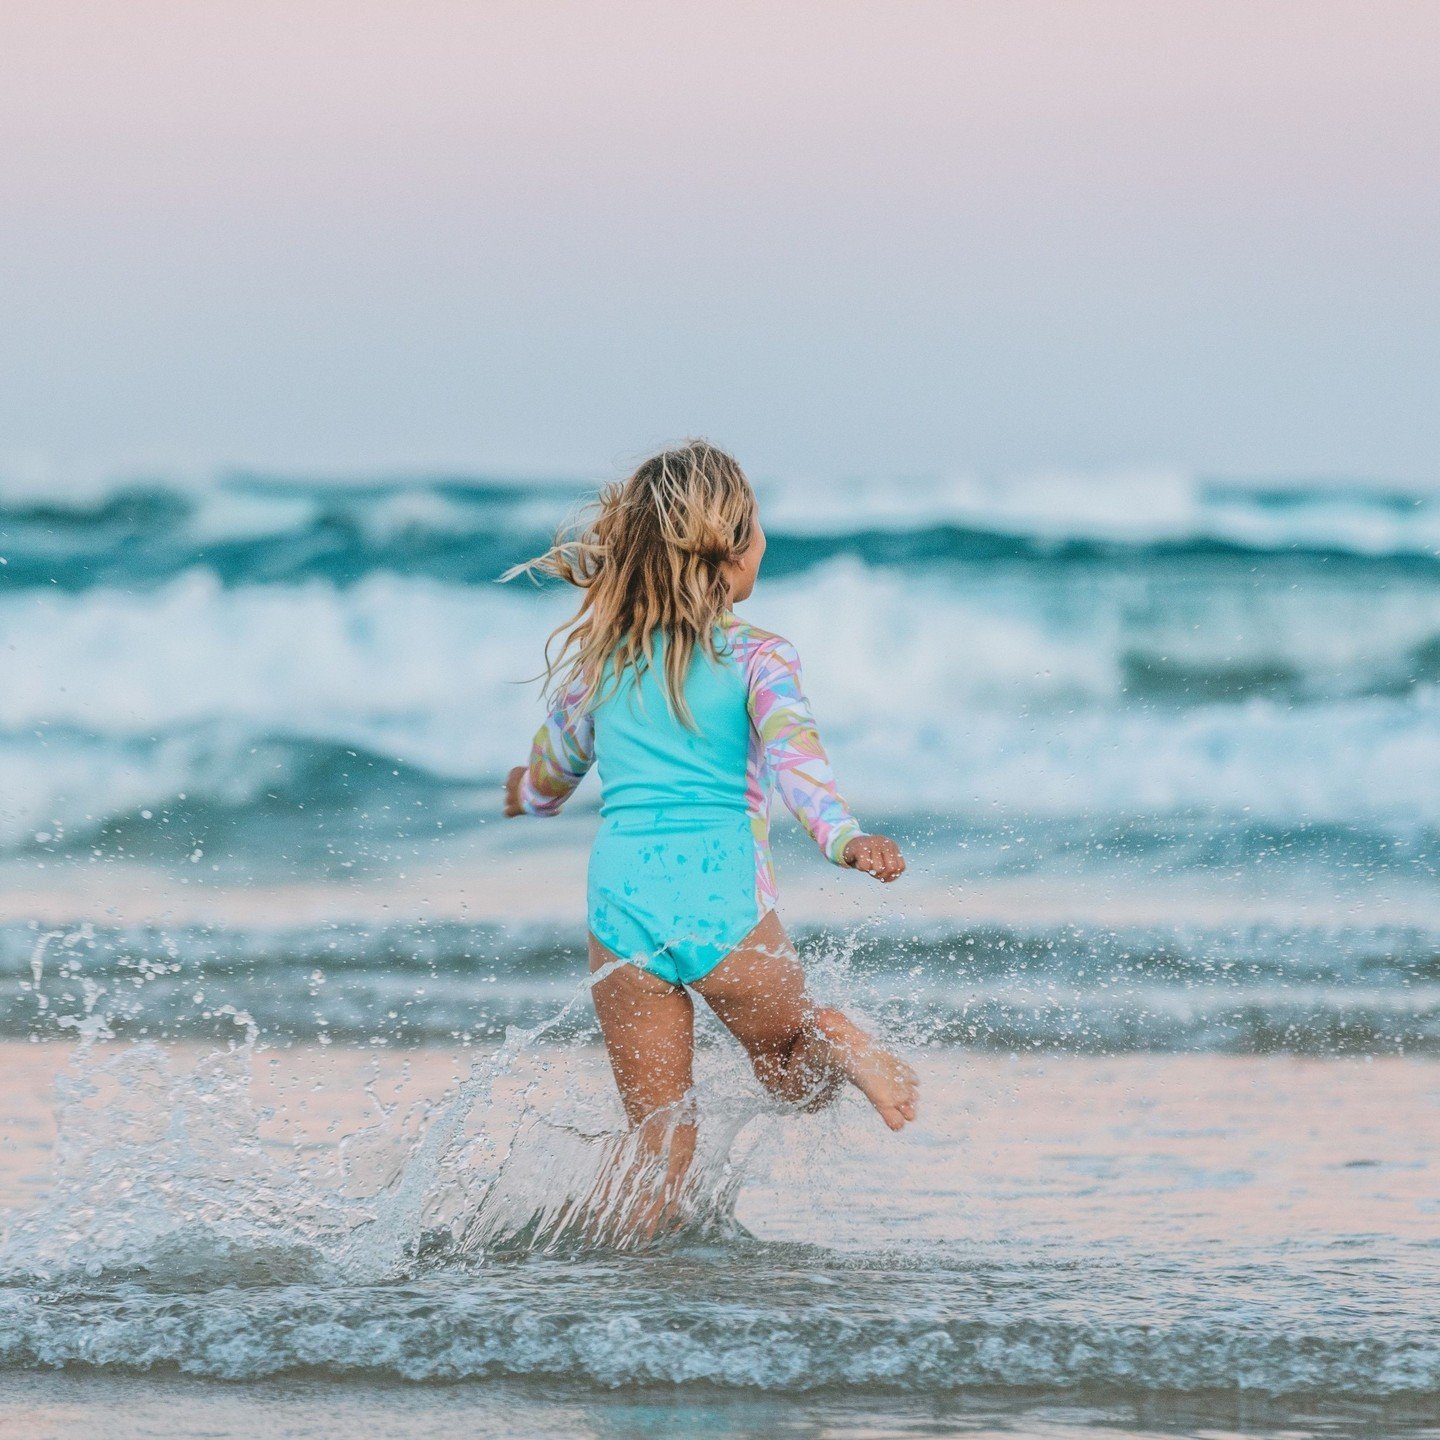 Turn your sunset strolls into salty splashes! We love seeing our new surf suits be a part of magical evenings like these! 🌊🌅⁠
⁠
⁠
⁠
 #forcleanoceans #pipinghot #herosfortheocean #australiansurf #sustainableclothing #surflife #surfingcommunity ⁠
#sh